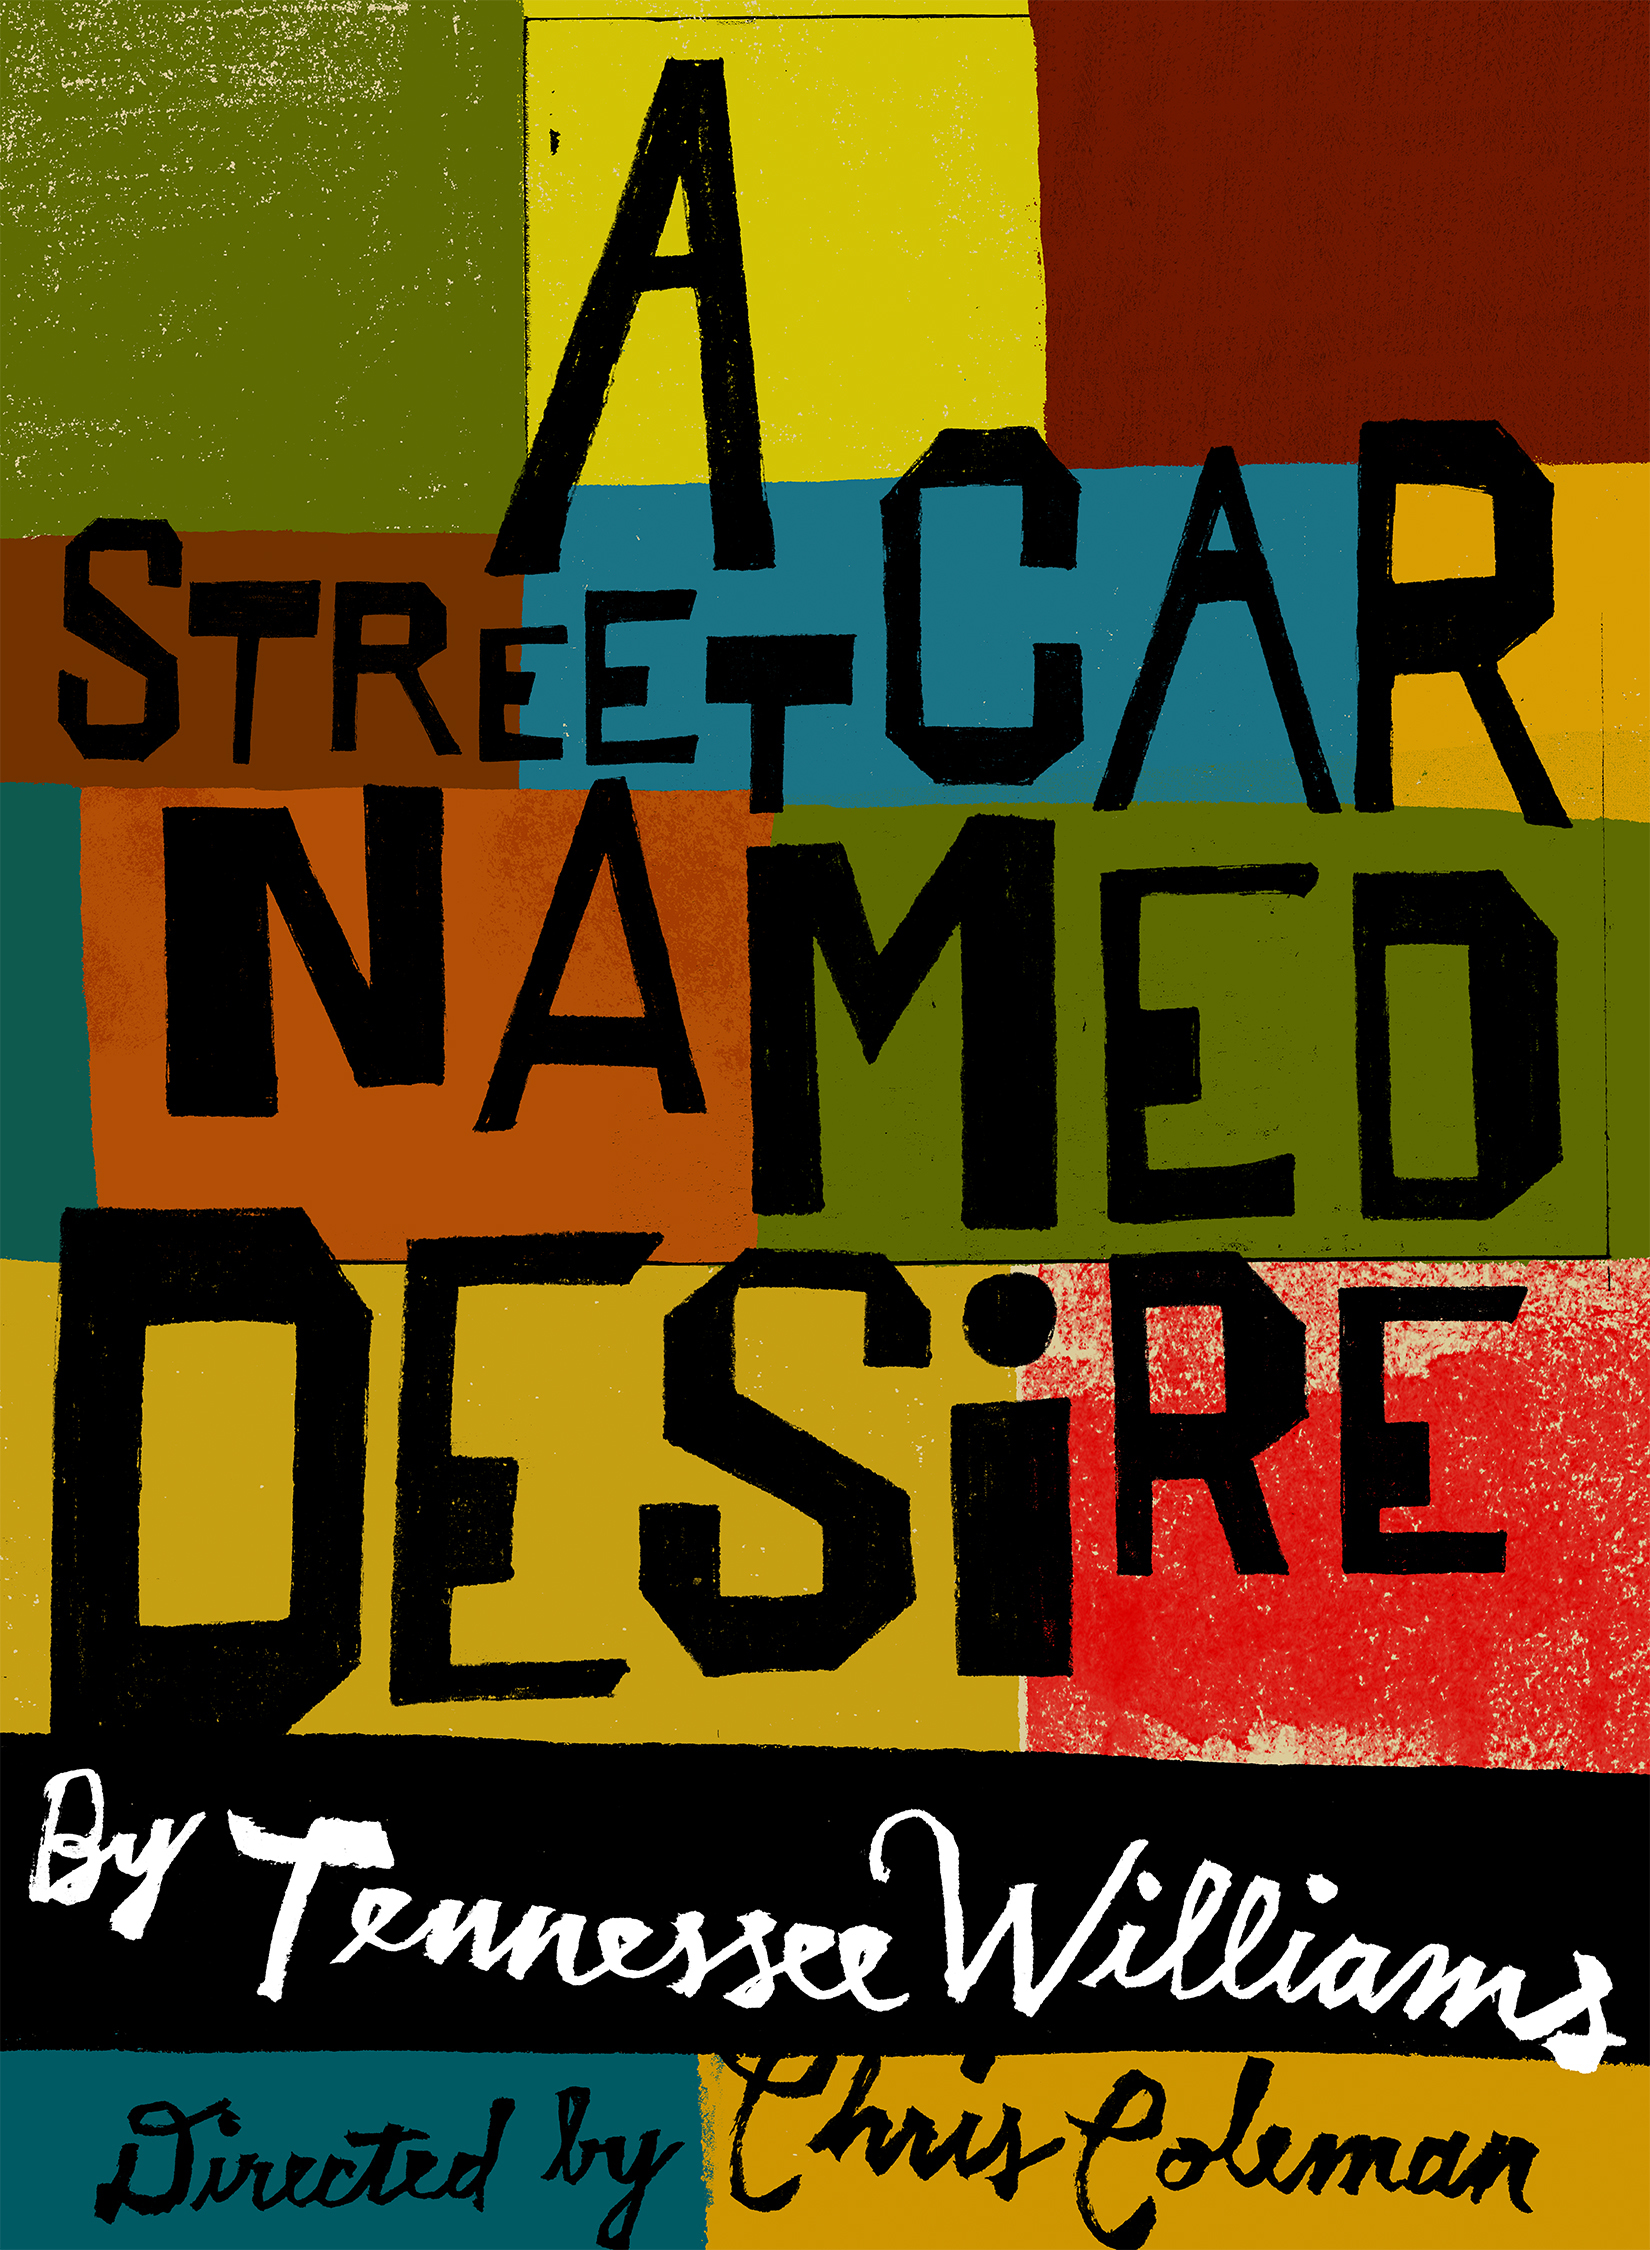 a streetcar named desire cover